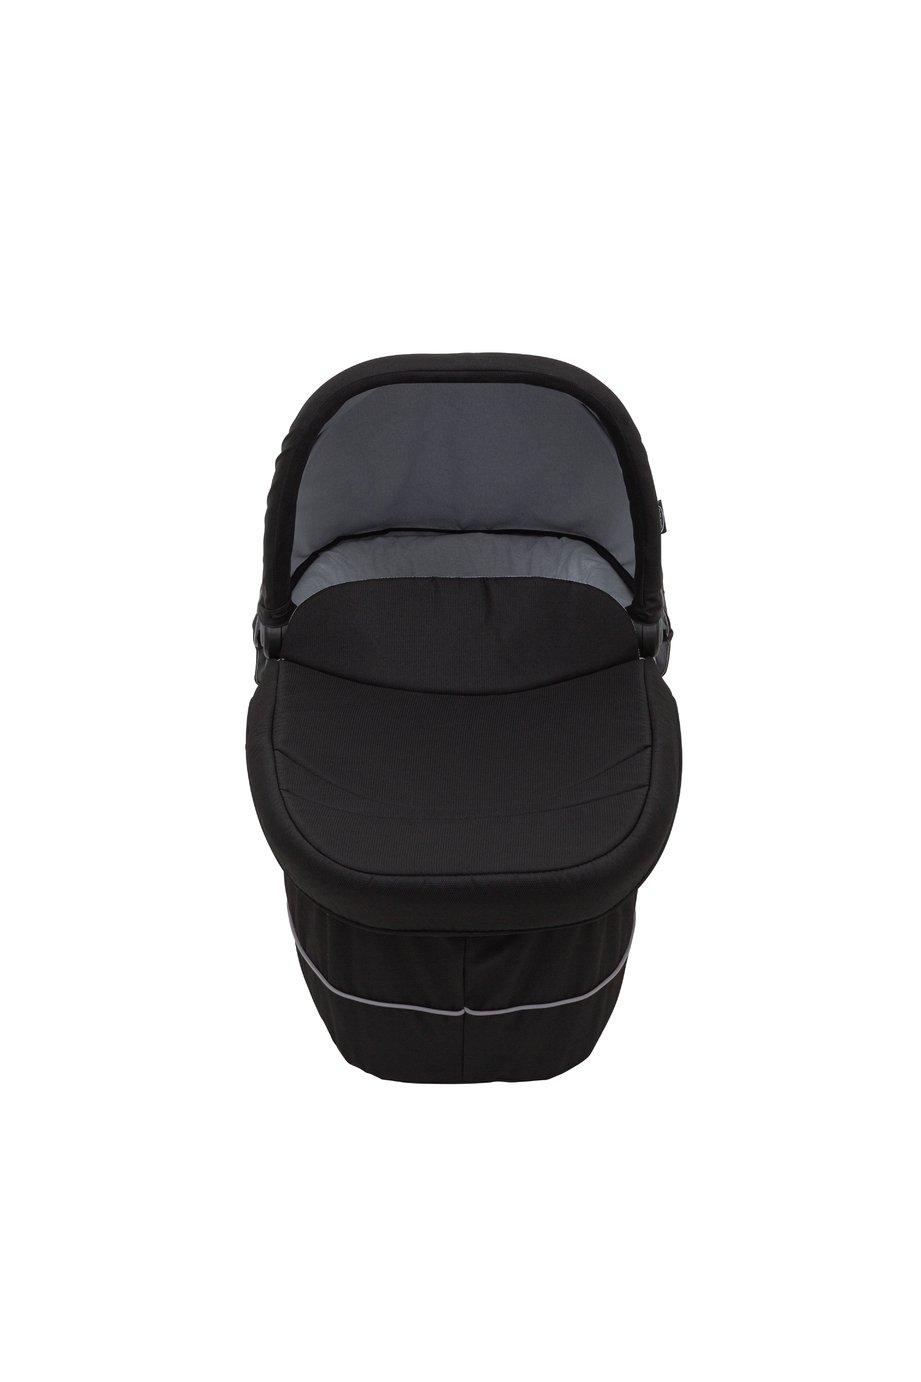 Graco Time2Grow Carrycot Review